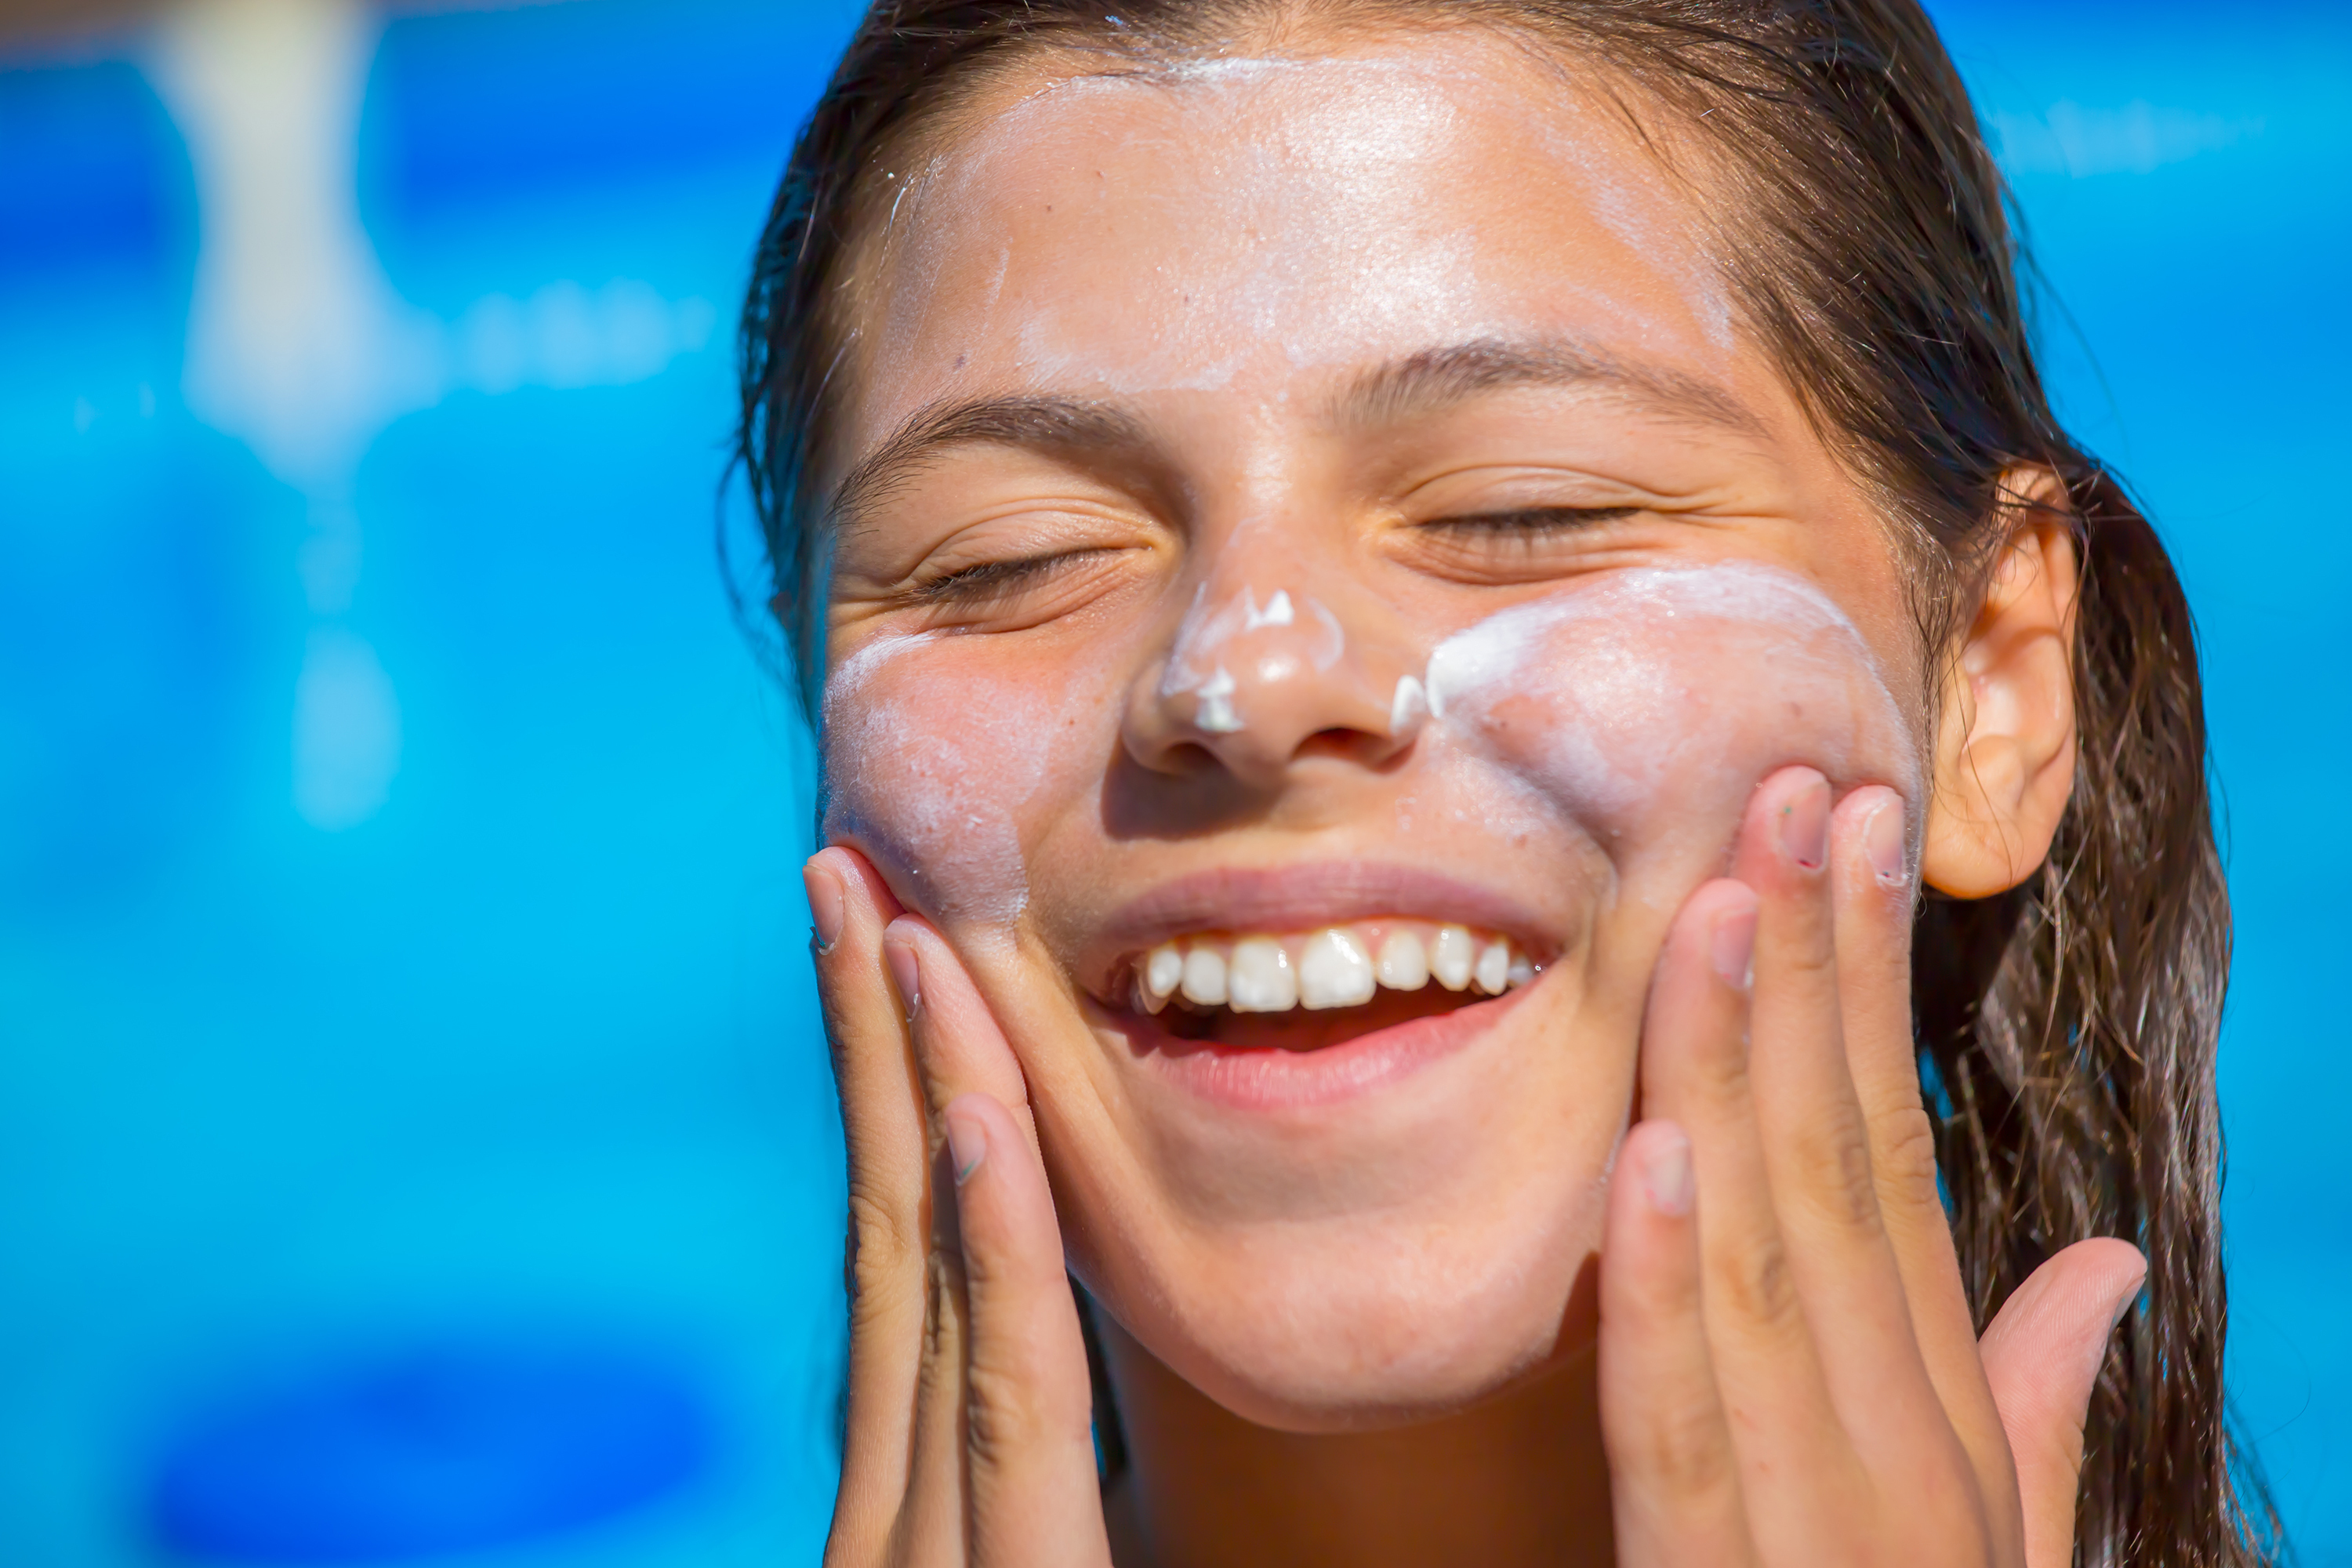 A woman applies sunscreen to the skin around her eyes.